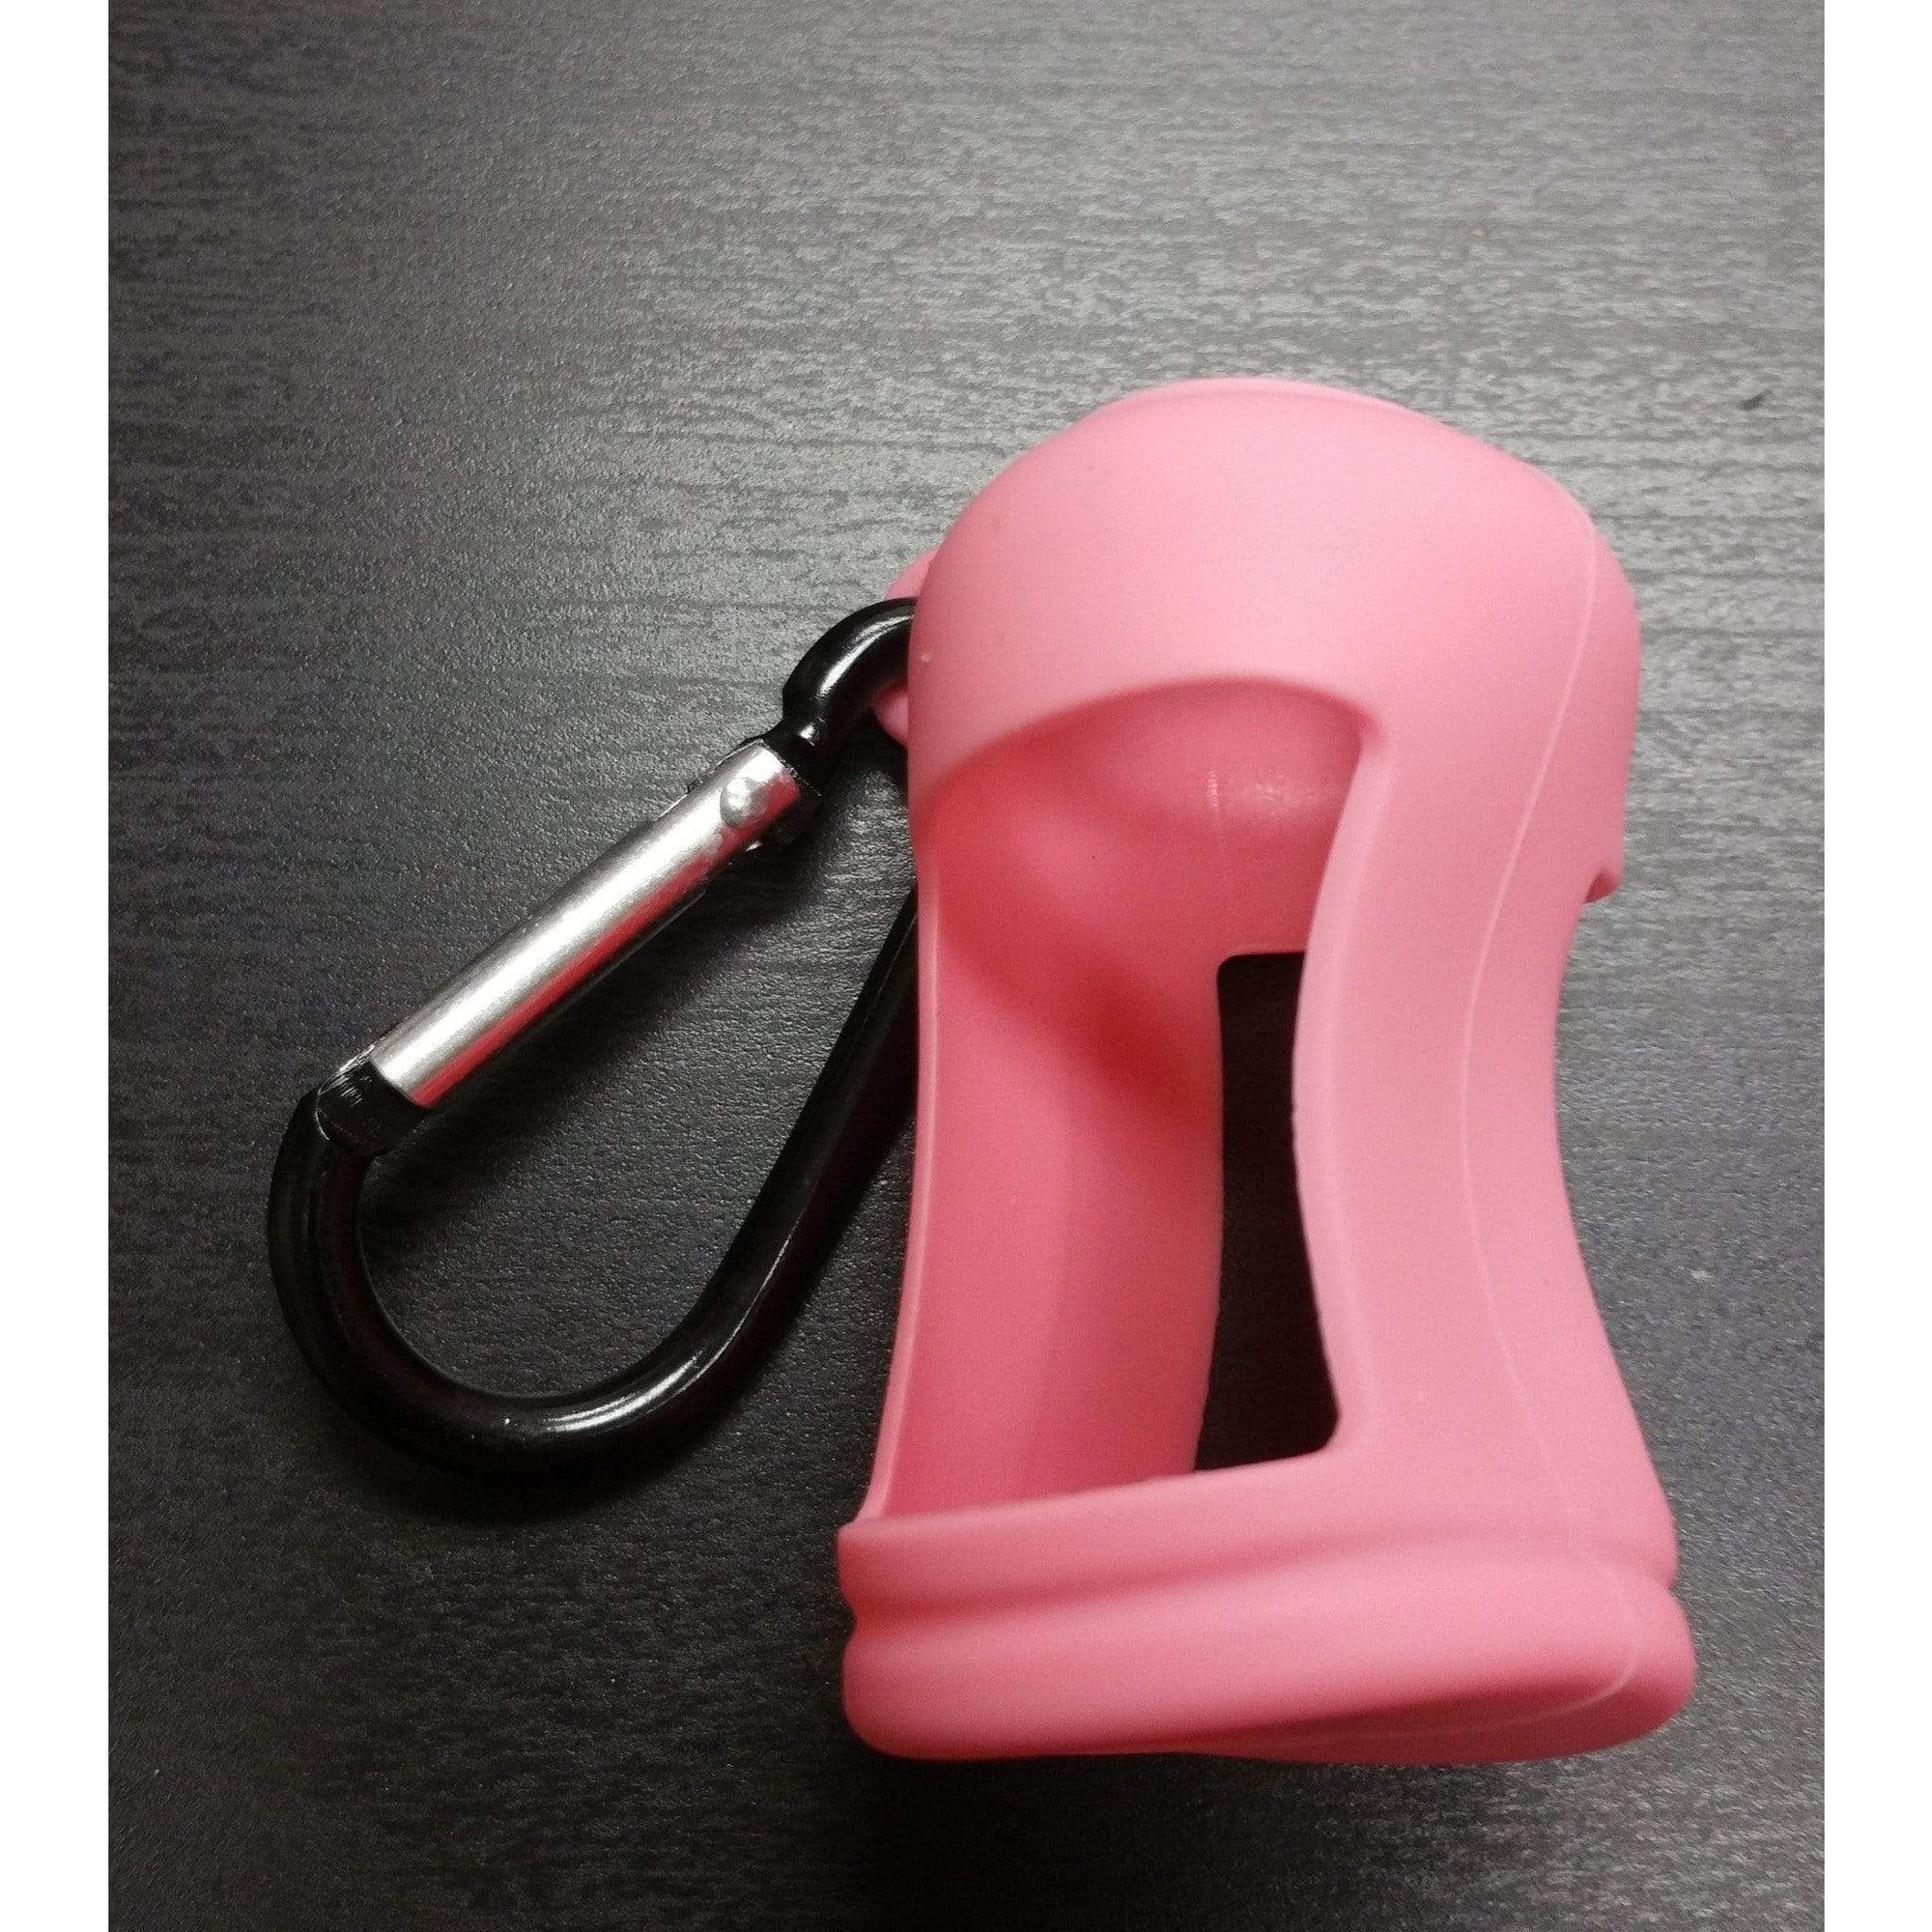 Silicone Sleeve Case for 30ml E-liquid Bottle Light Pink Silicone Cases